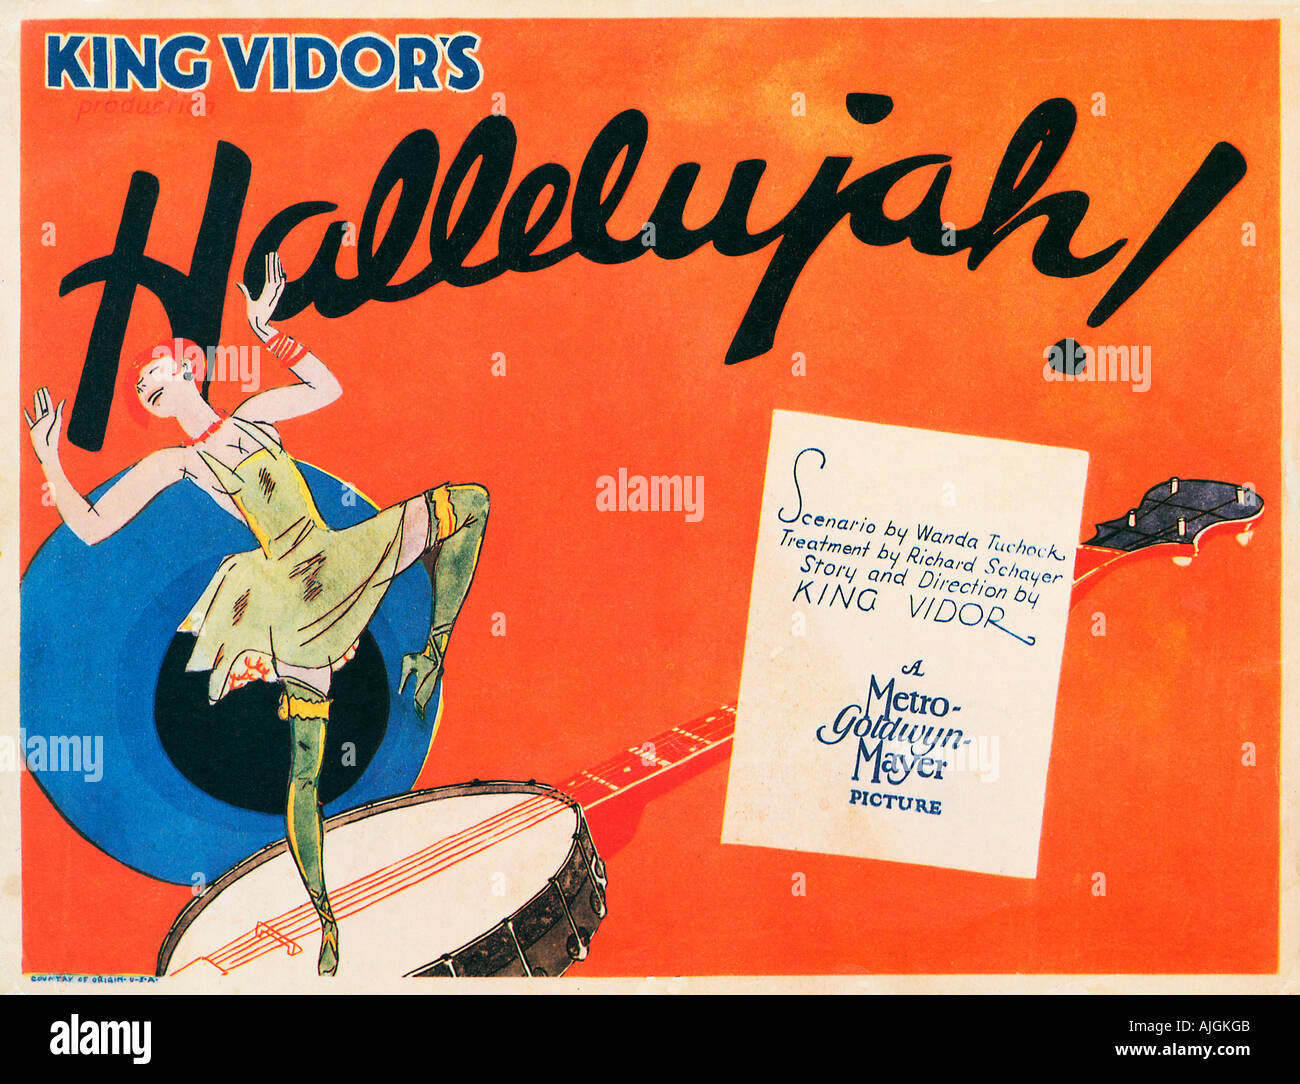 Hallelujah, lobby card illustration for the 1929 groundbreaking first all-black Hollywood film, a jazz musical Stock Photo